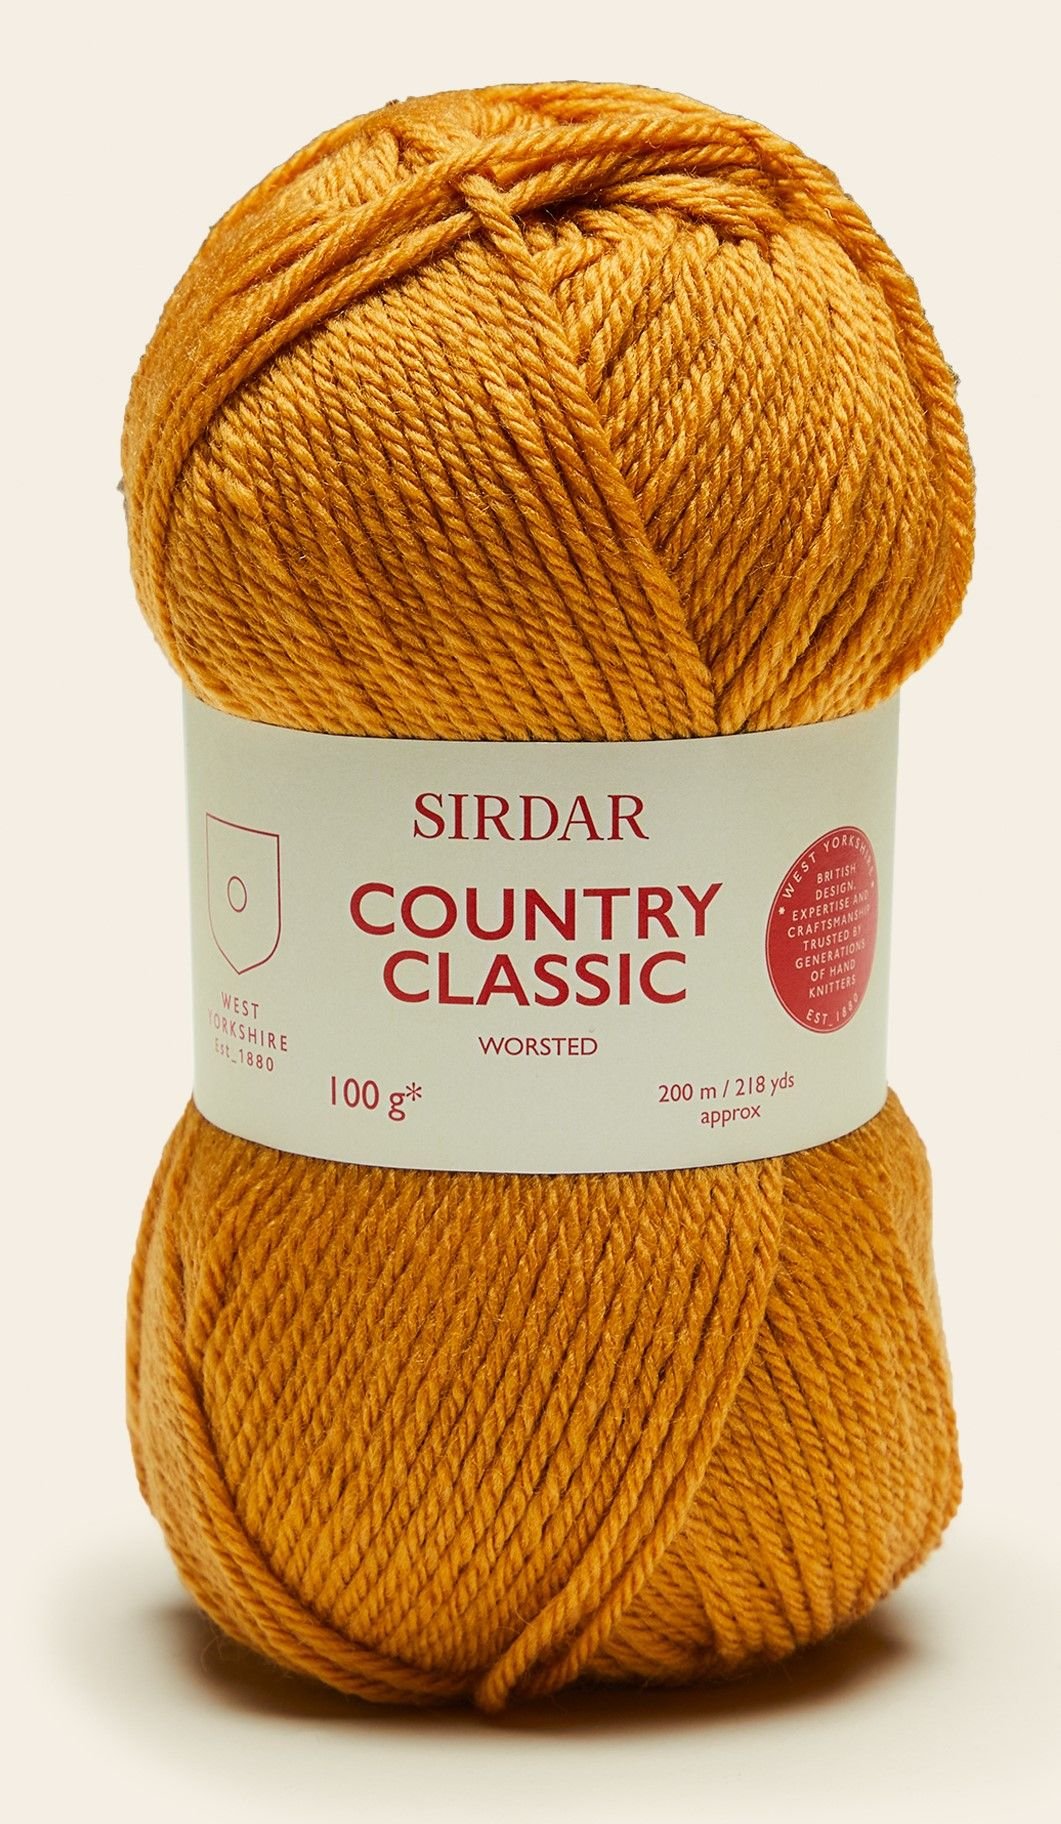 Sirdar Country Classic Worsted (50% Acrylic, 50% Wool)